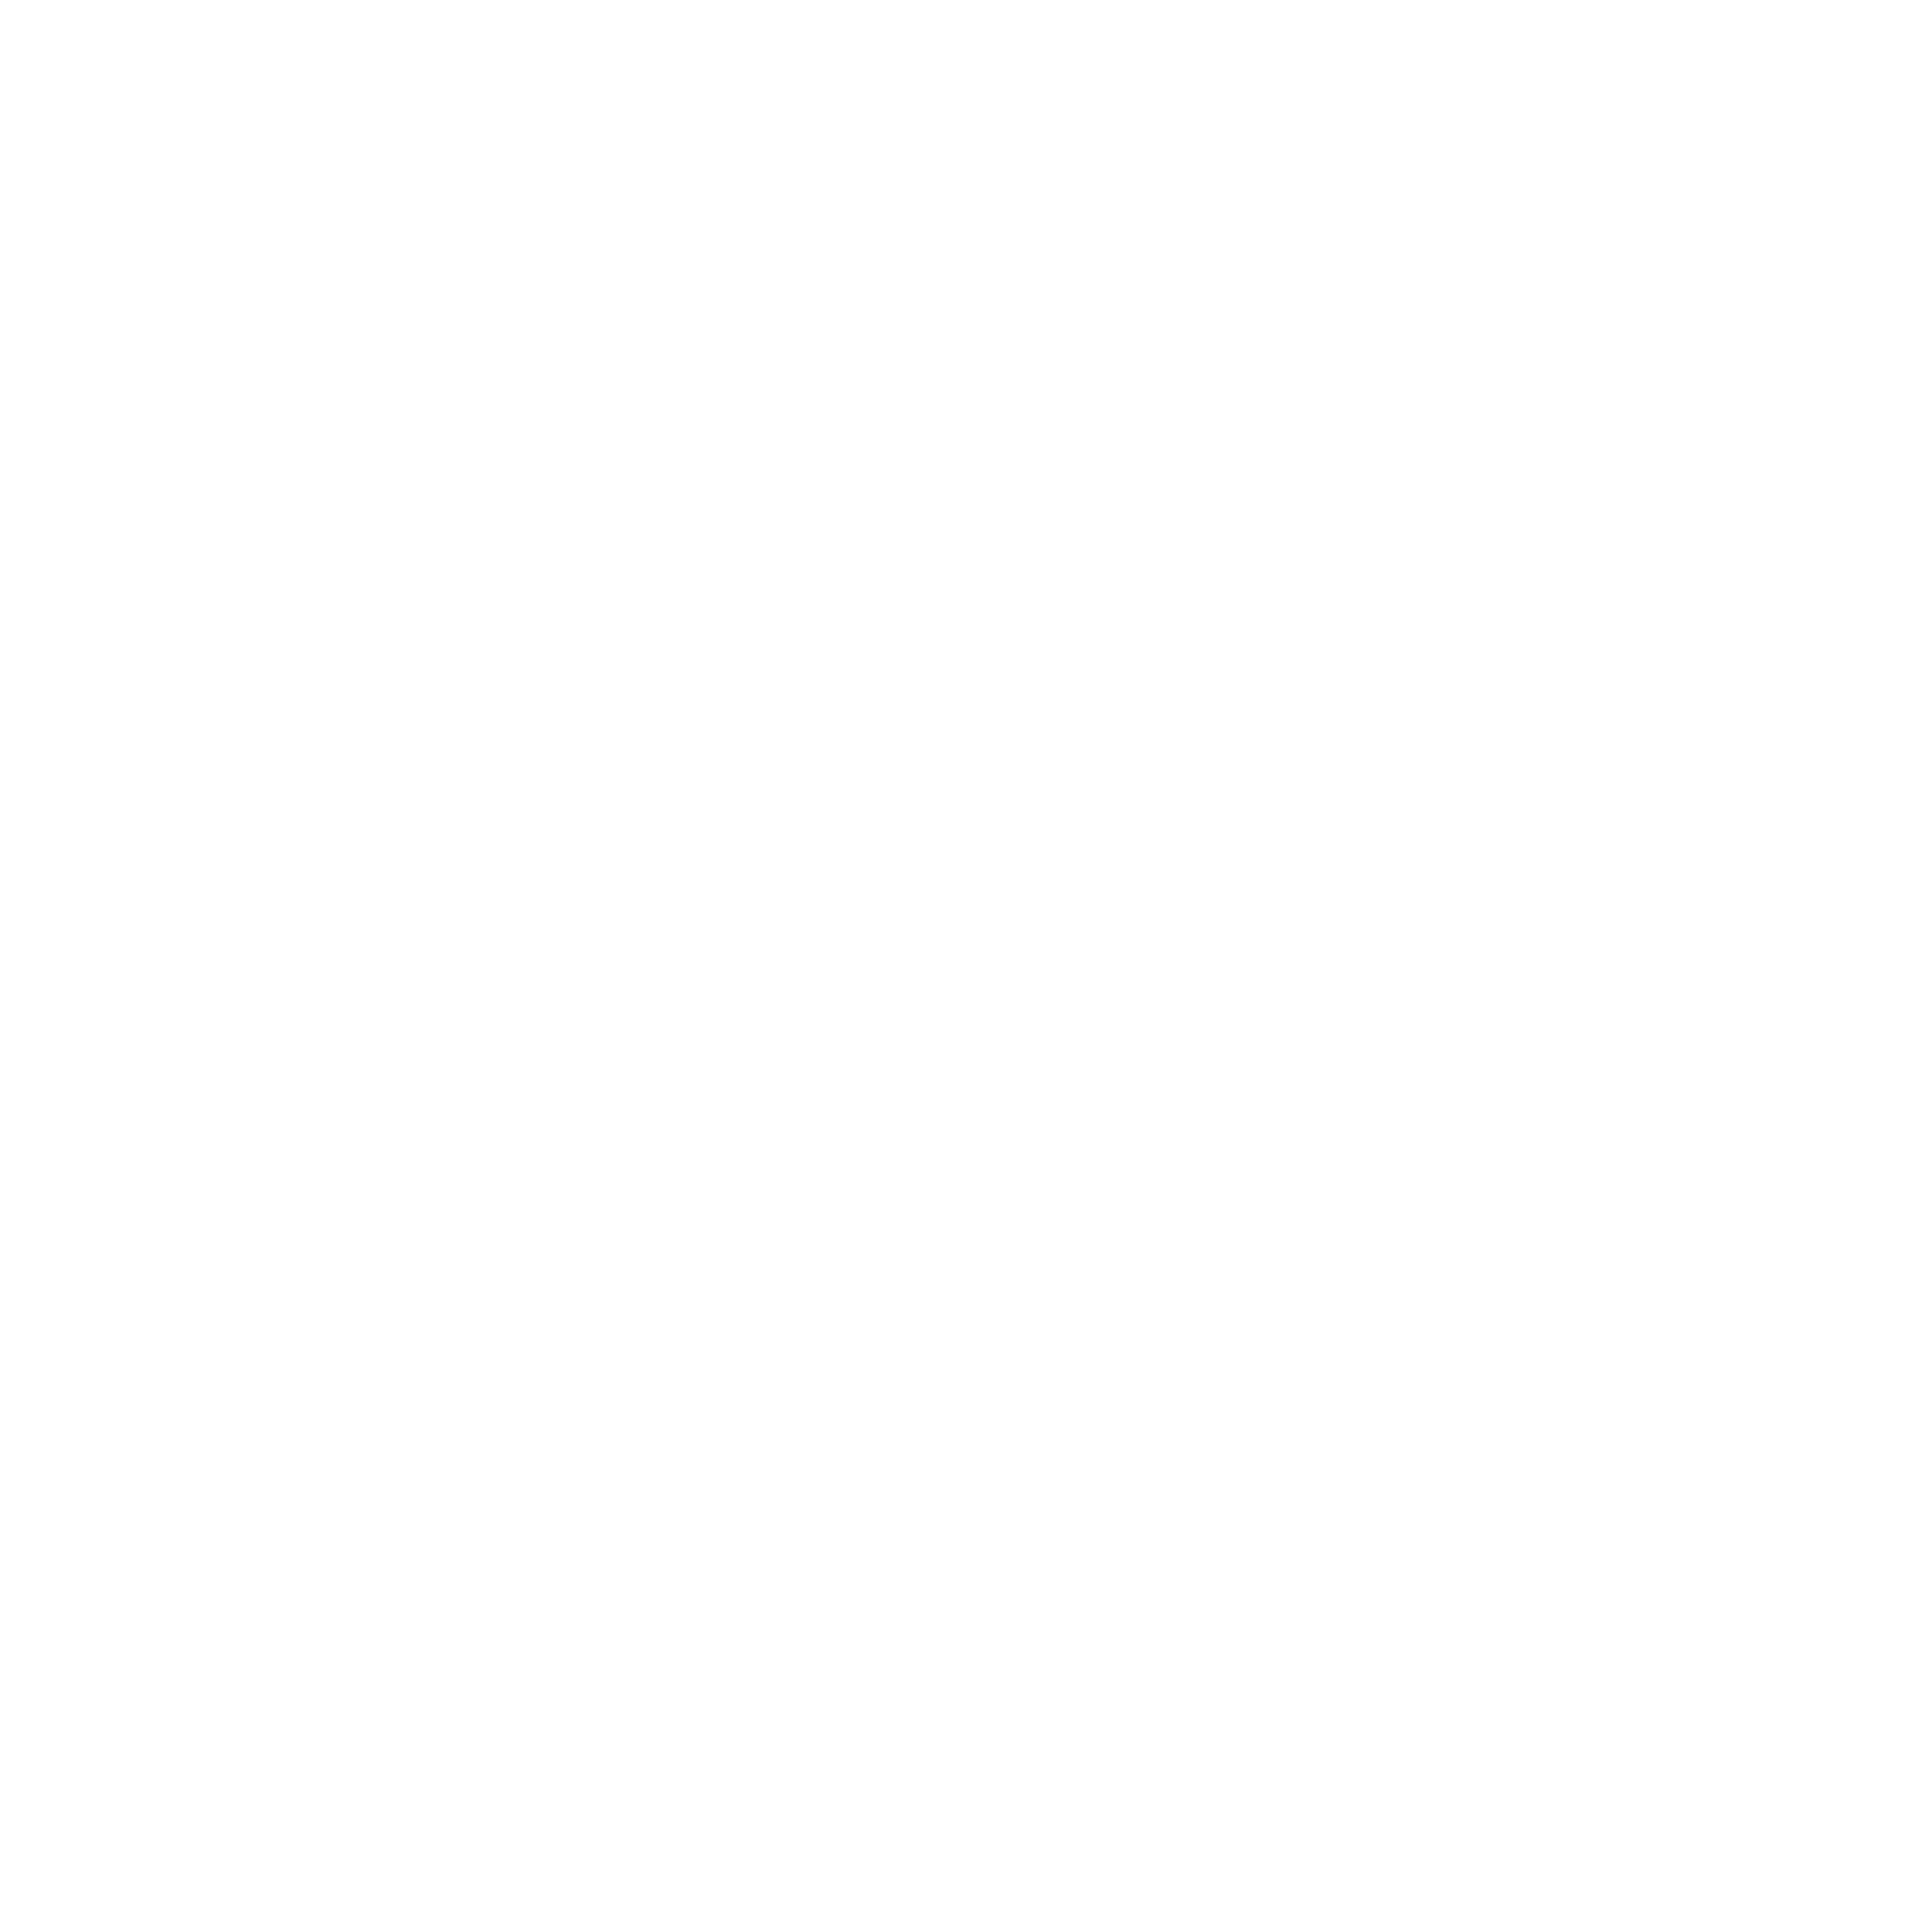 328-sd-music-festival-transparent-whitepng-1694926642561.png